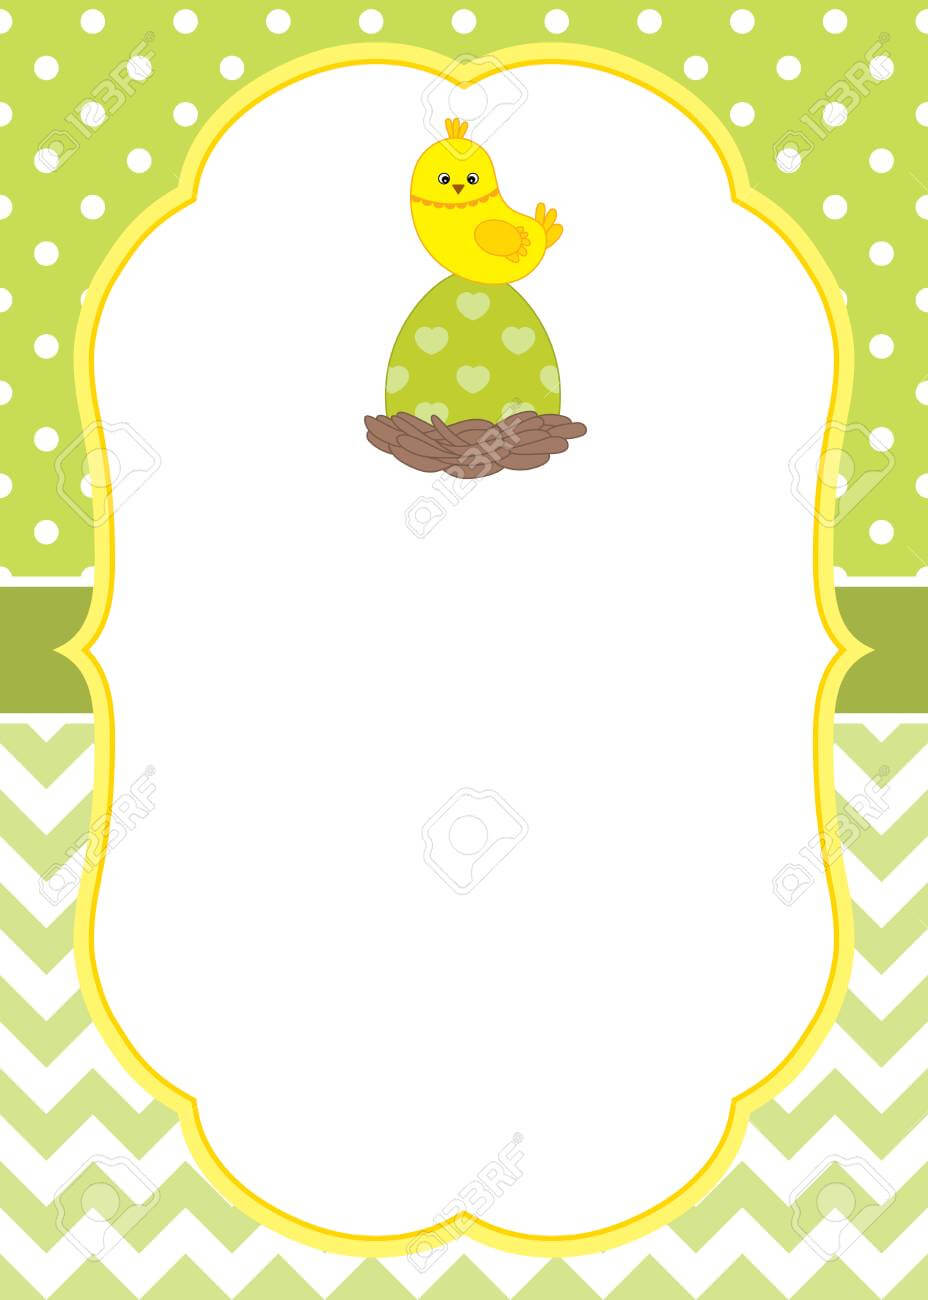 Vector Card Template With A Cute Chick On Polka Dot And Chevron Background.  Vector Easter Egg. Vector Illustration. Intended For Easter Chick Card Template